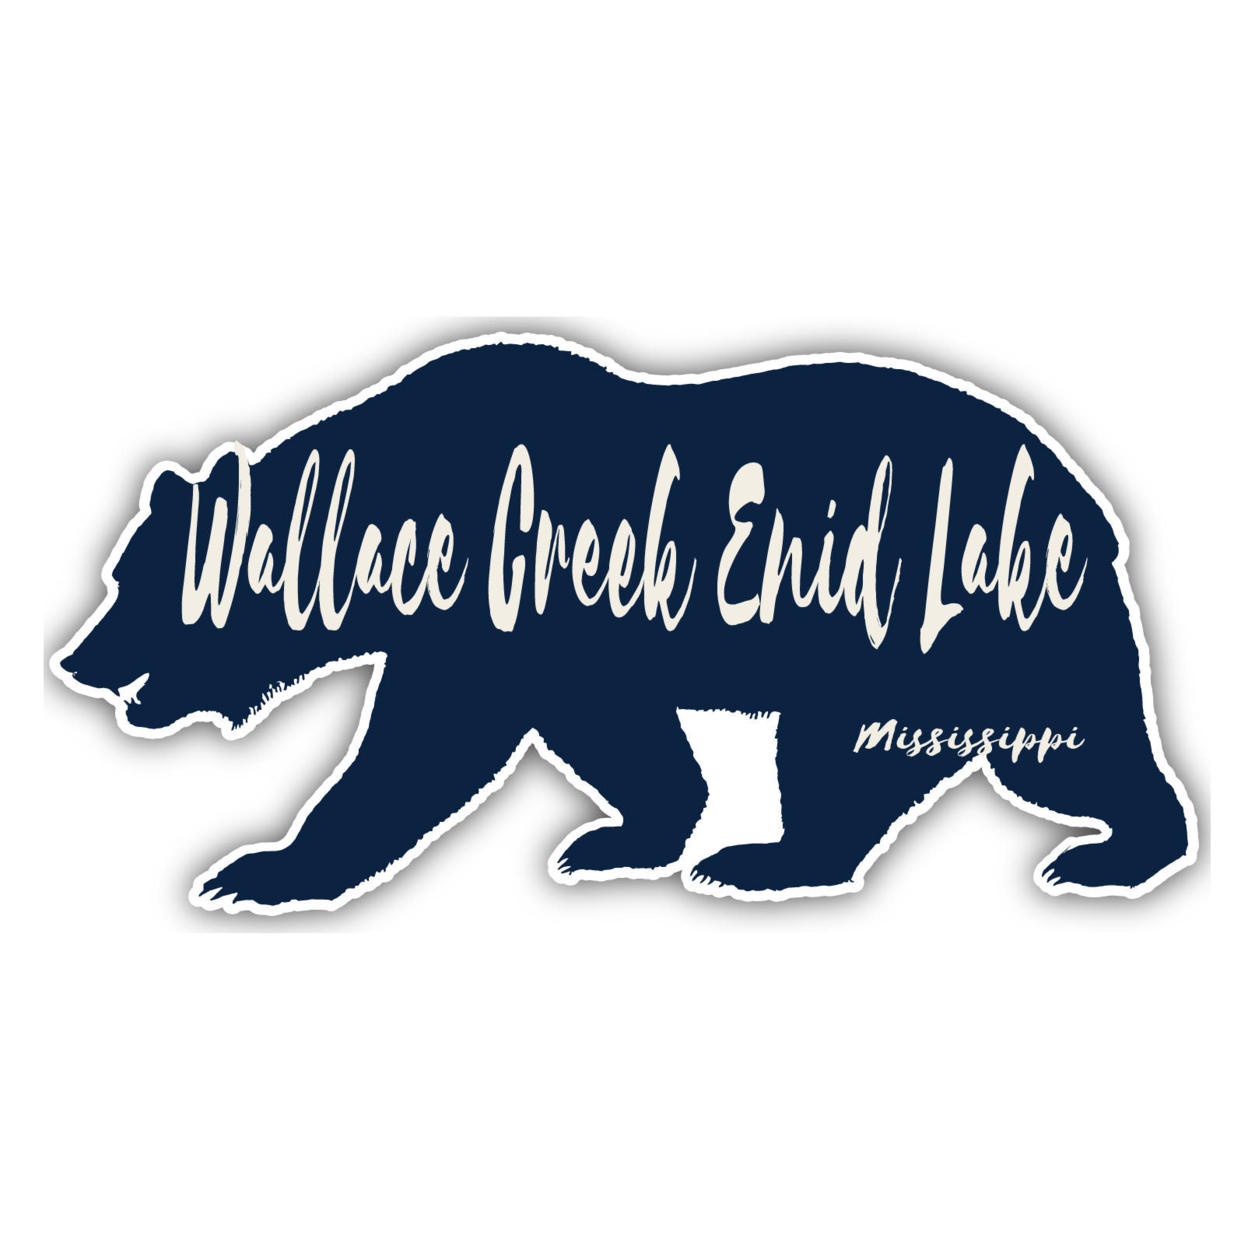 Wallace Creek Enid Lake Mississippi Souvenir Decorative Stickers (Choose Theme And Size) - Single Unit, 2-Inch, Bear